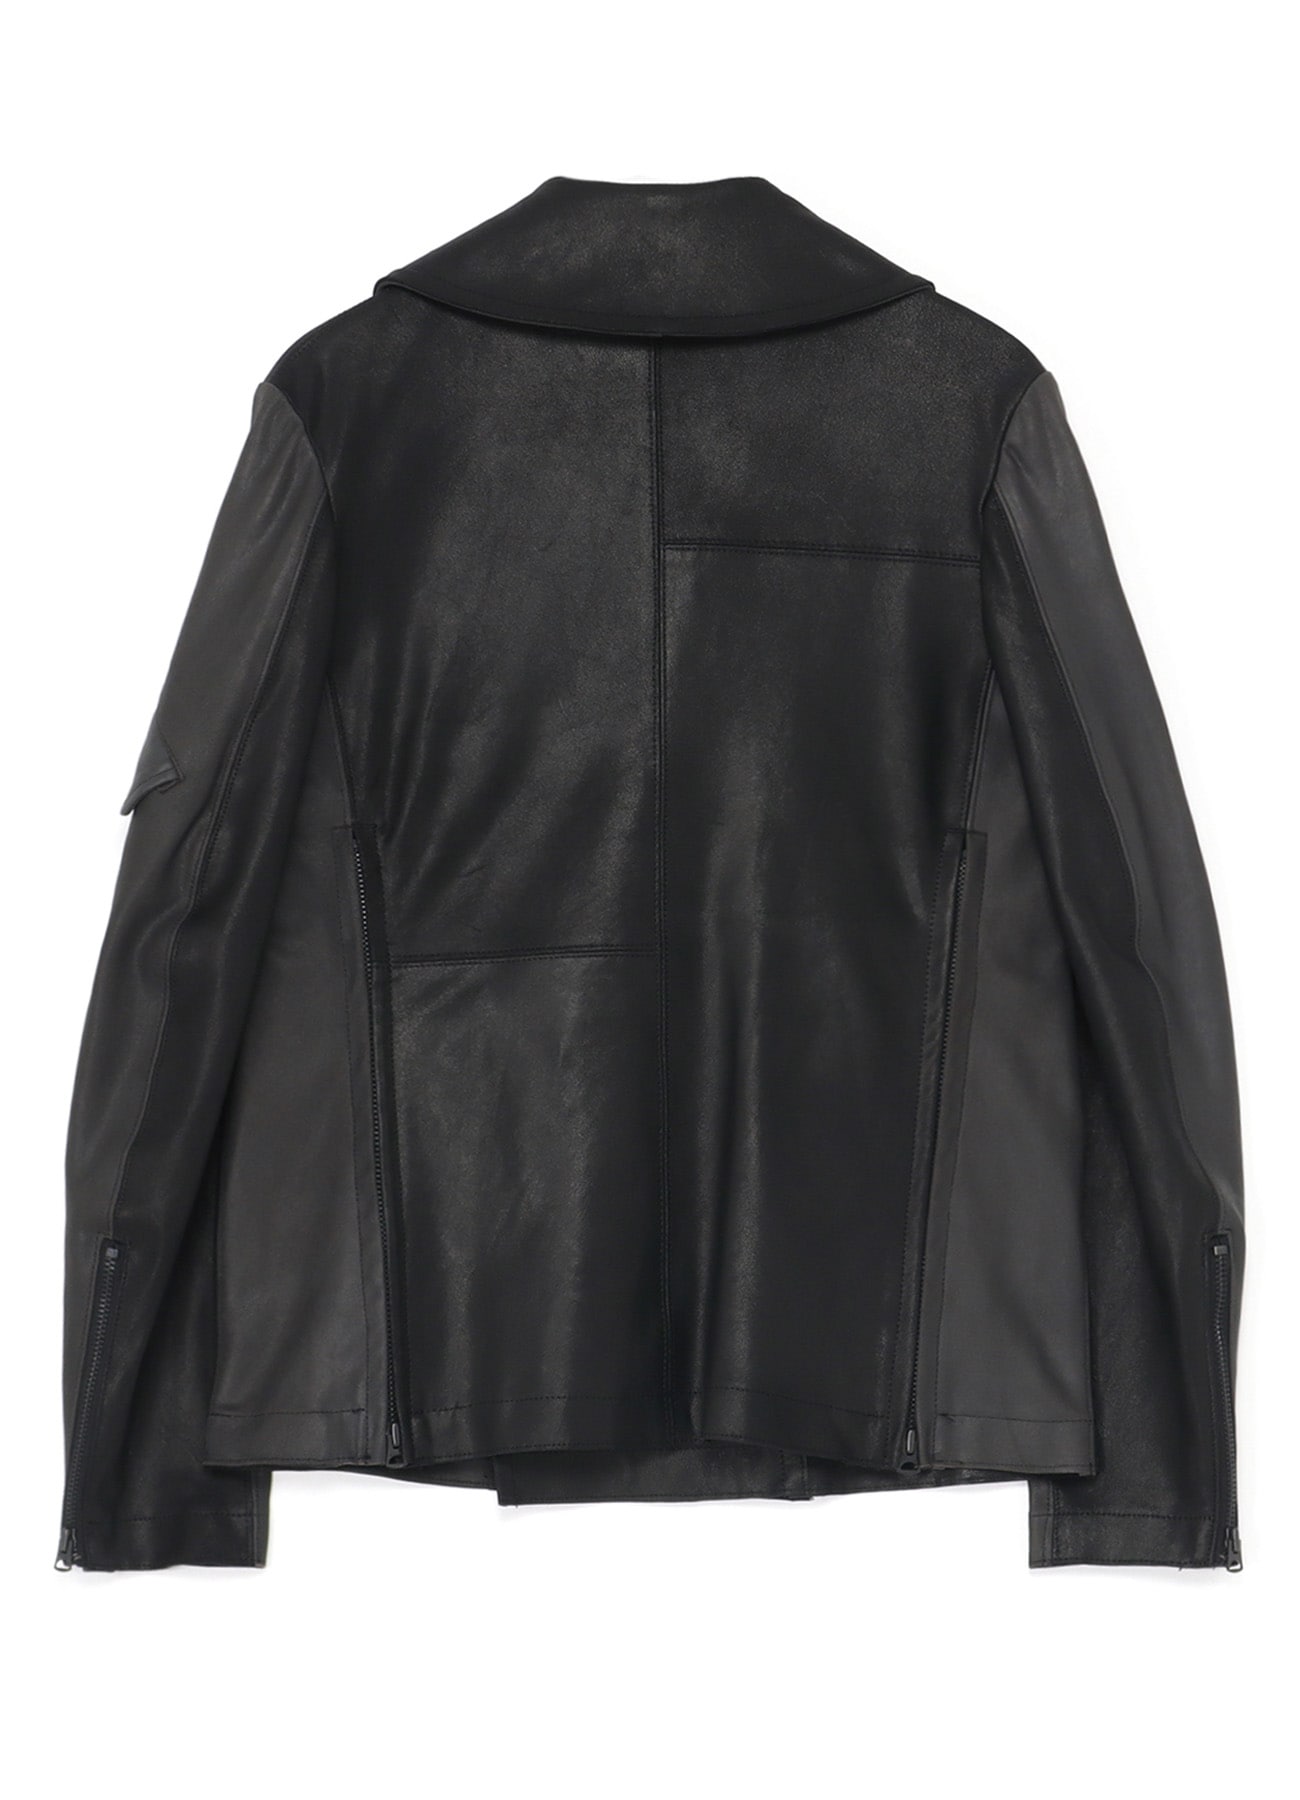 [Y's-Black Name] 2-TONE GOAT LEATHER DOUBLE BREASTED BLOUSON